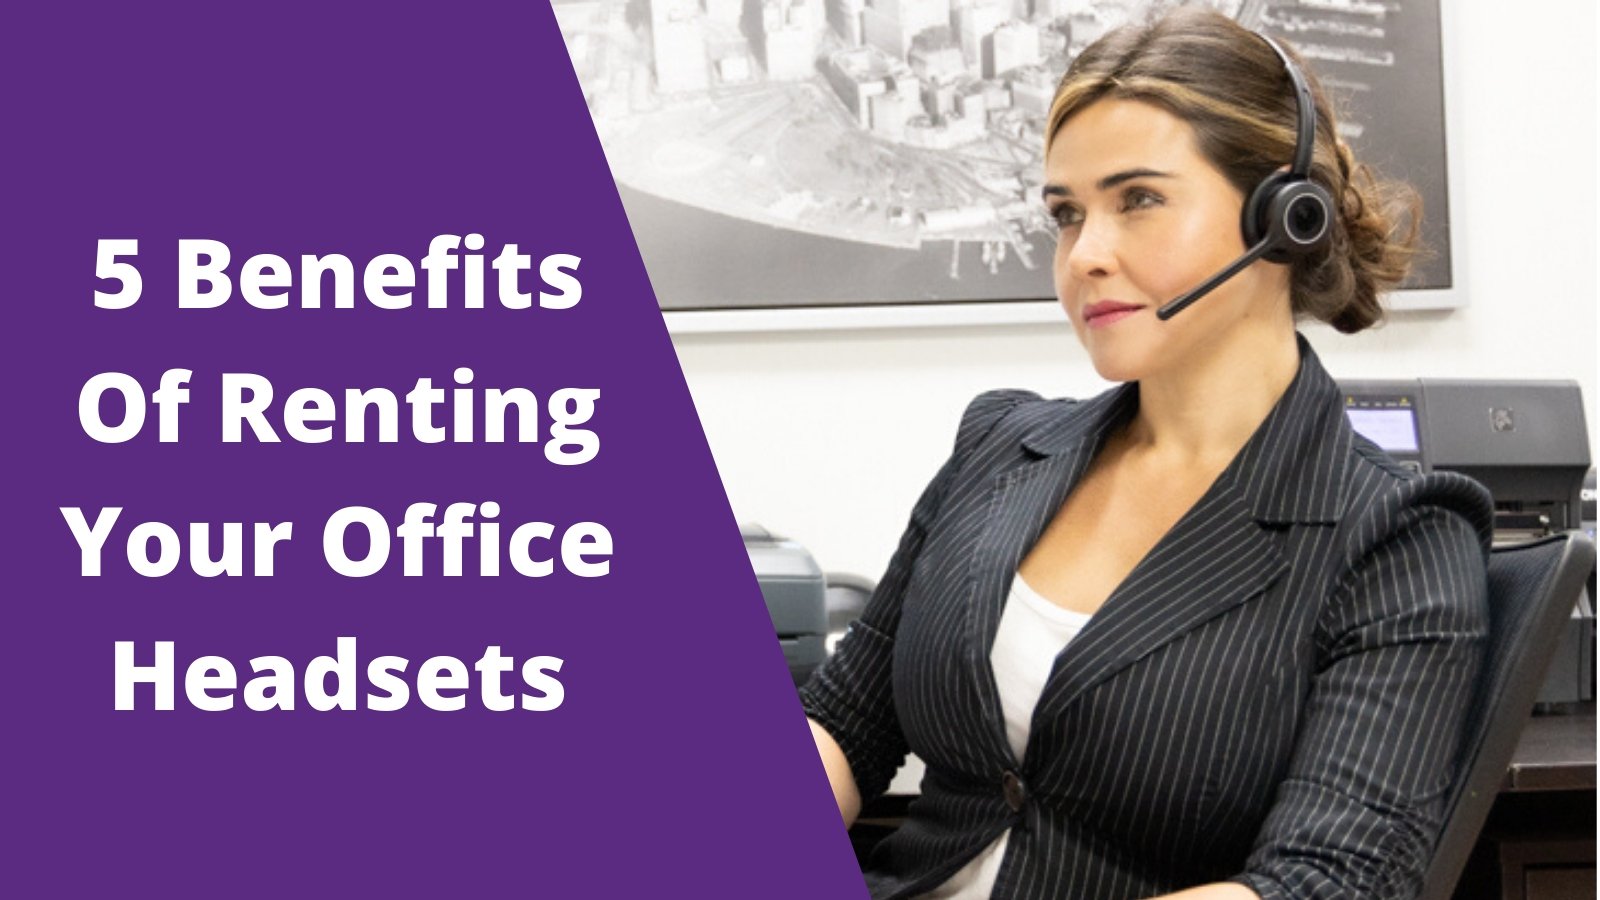 5 Benefits Of Renting Your Office Headsets - Headset Advisor